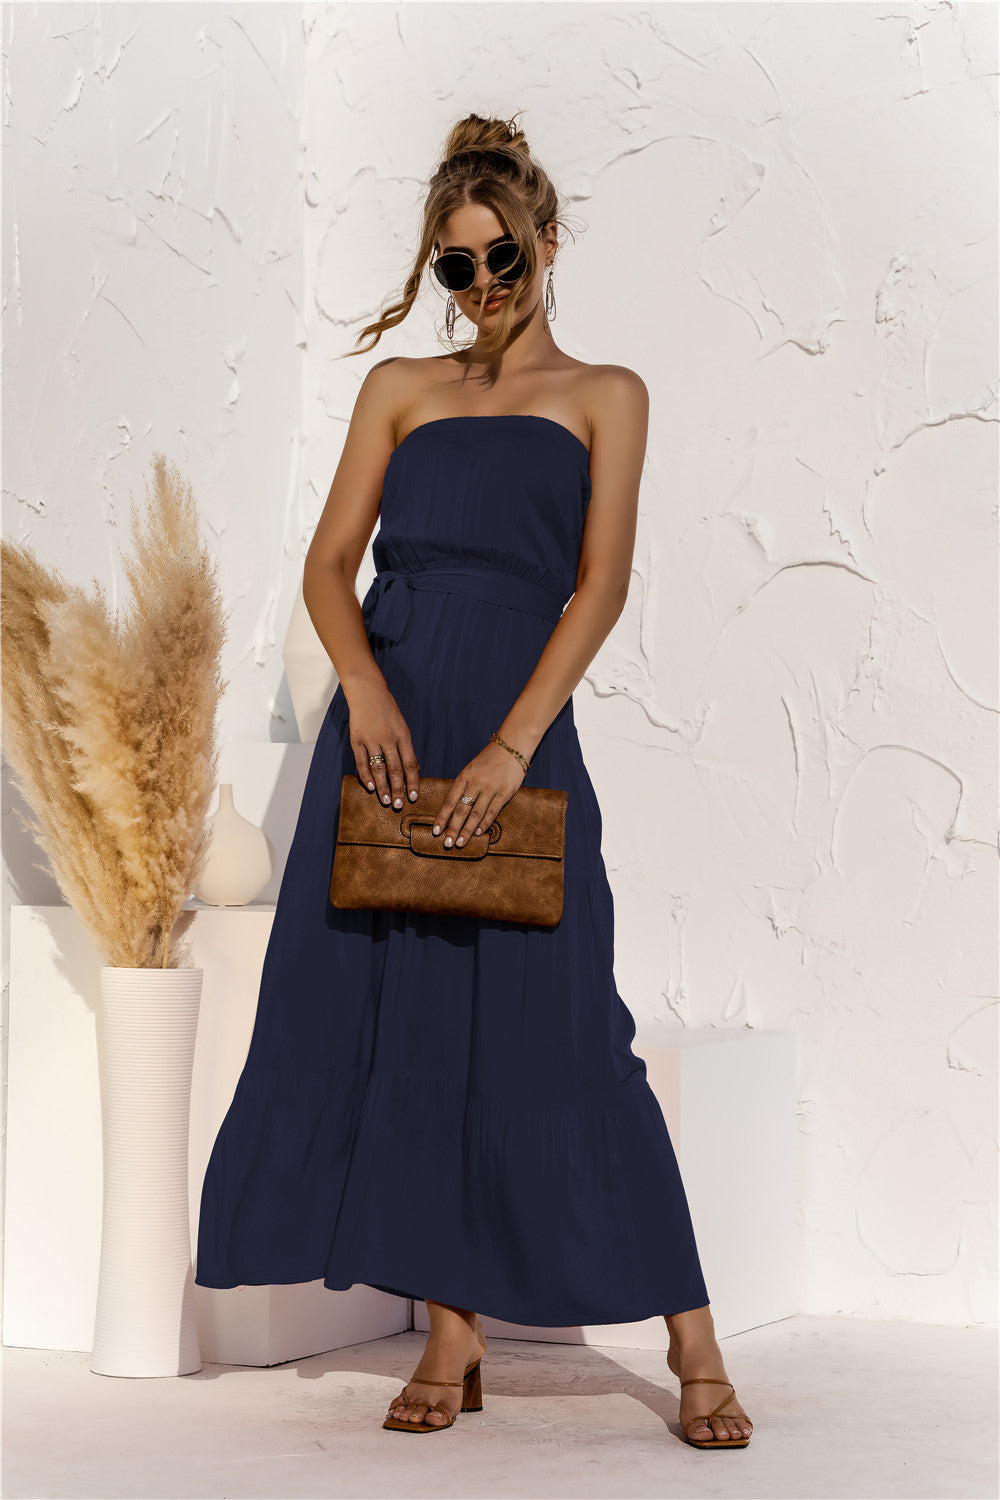 Don’t Mind Me Strapless Maxi Dress - navy blue strapless maxi dress with top overlay and tie waist. #Firefly Lane Boutique1